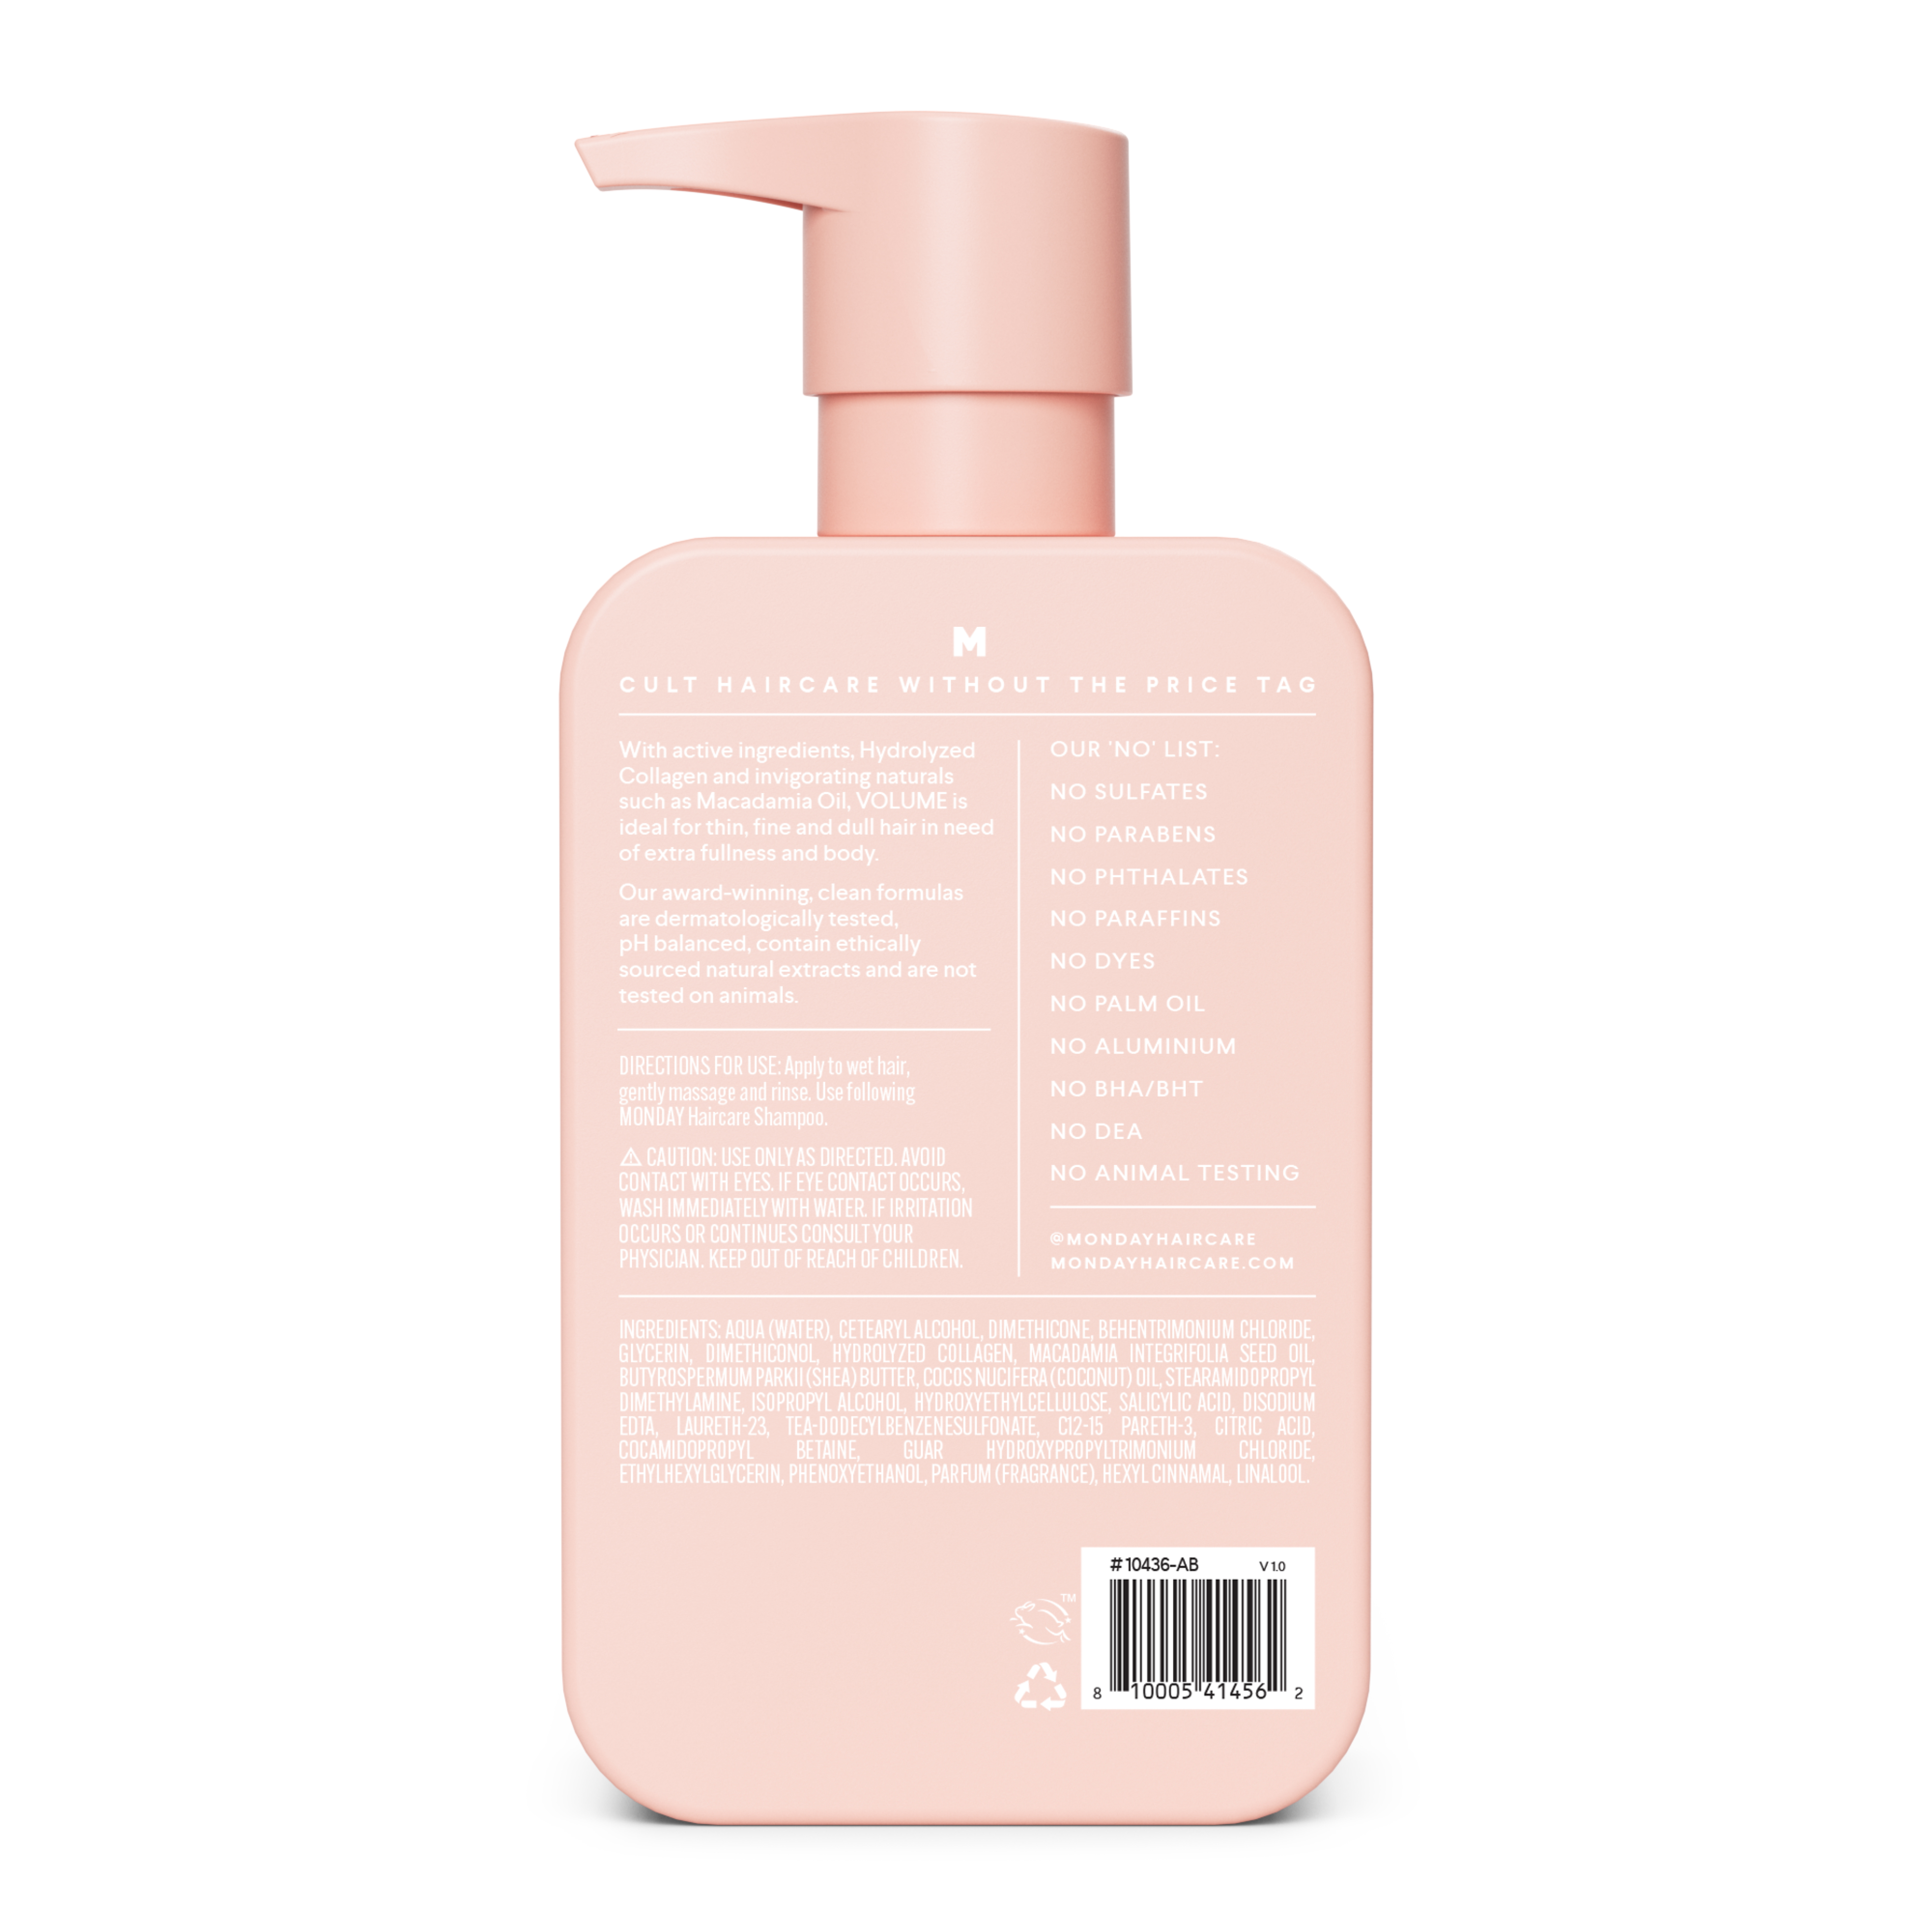 MONDAY Haircare VOLUME Conditioner Sulfate- and Paraben-Free 354ml (12oz) - image 2 of 5